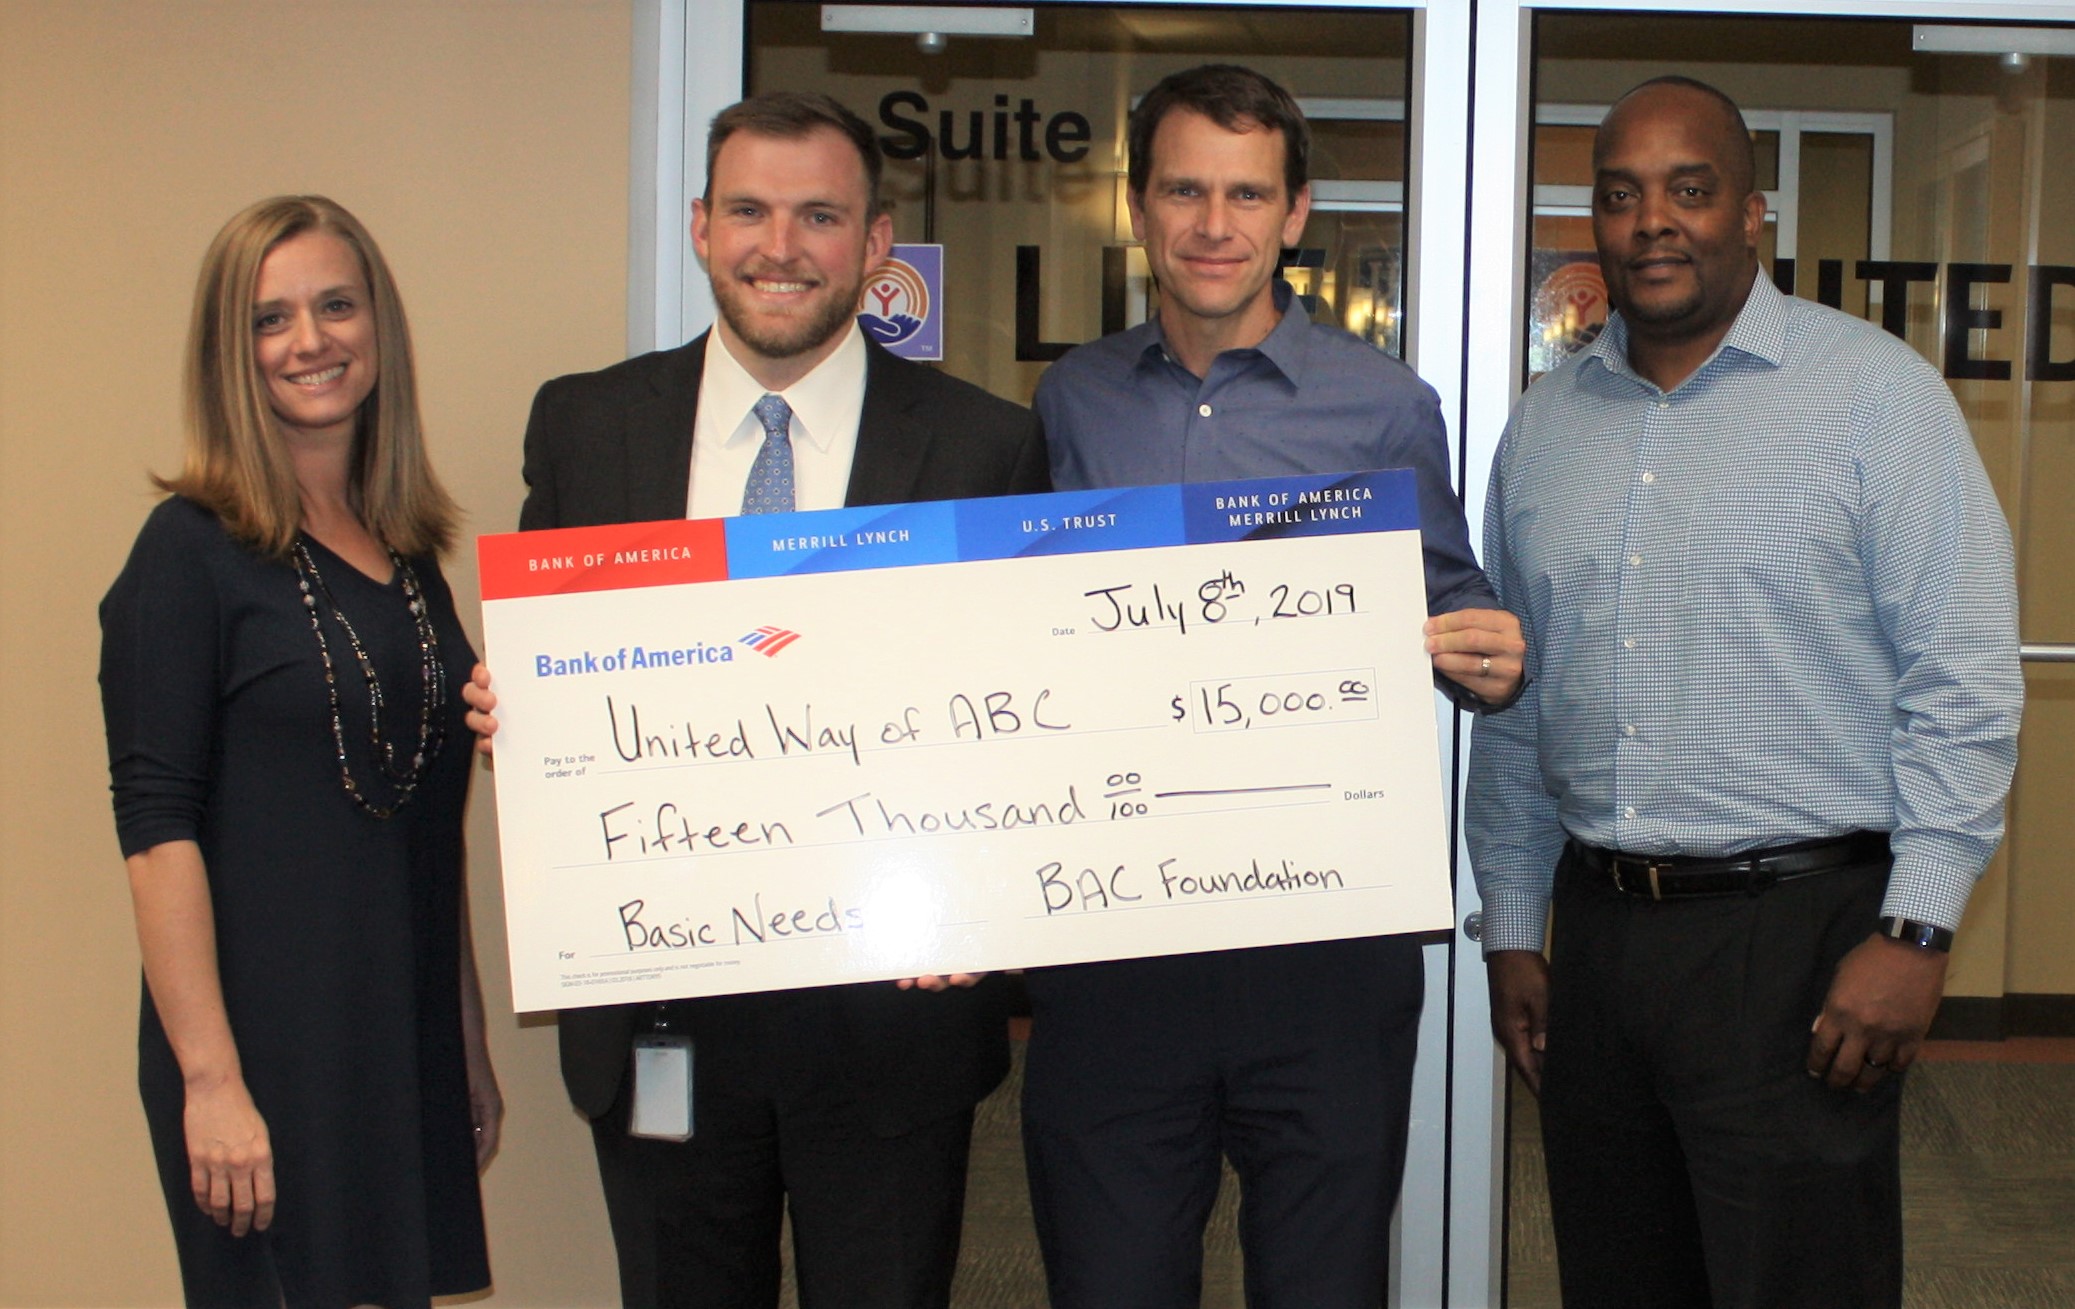 A check presentation from our friends at Bank of America